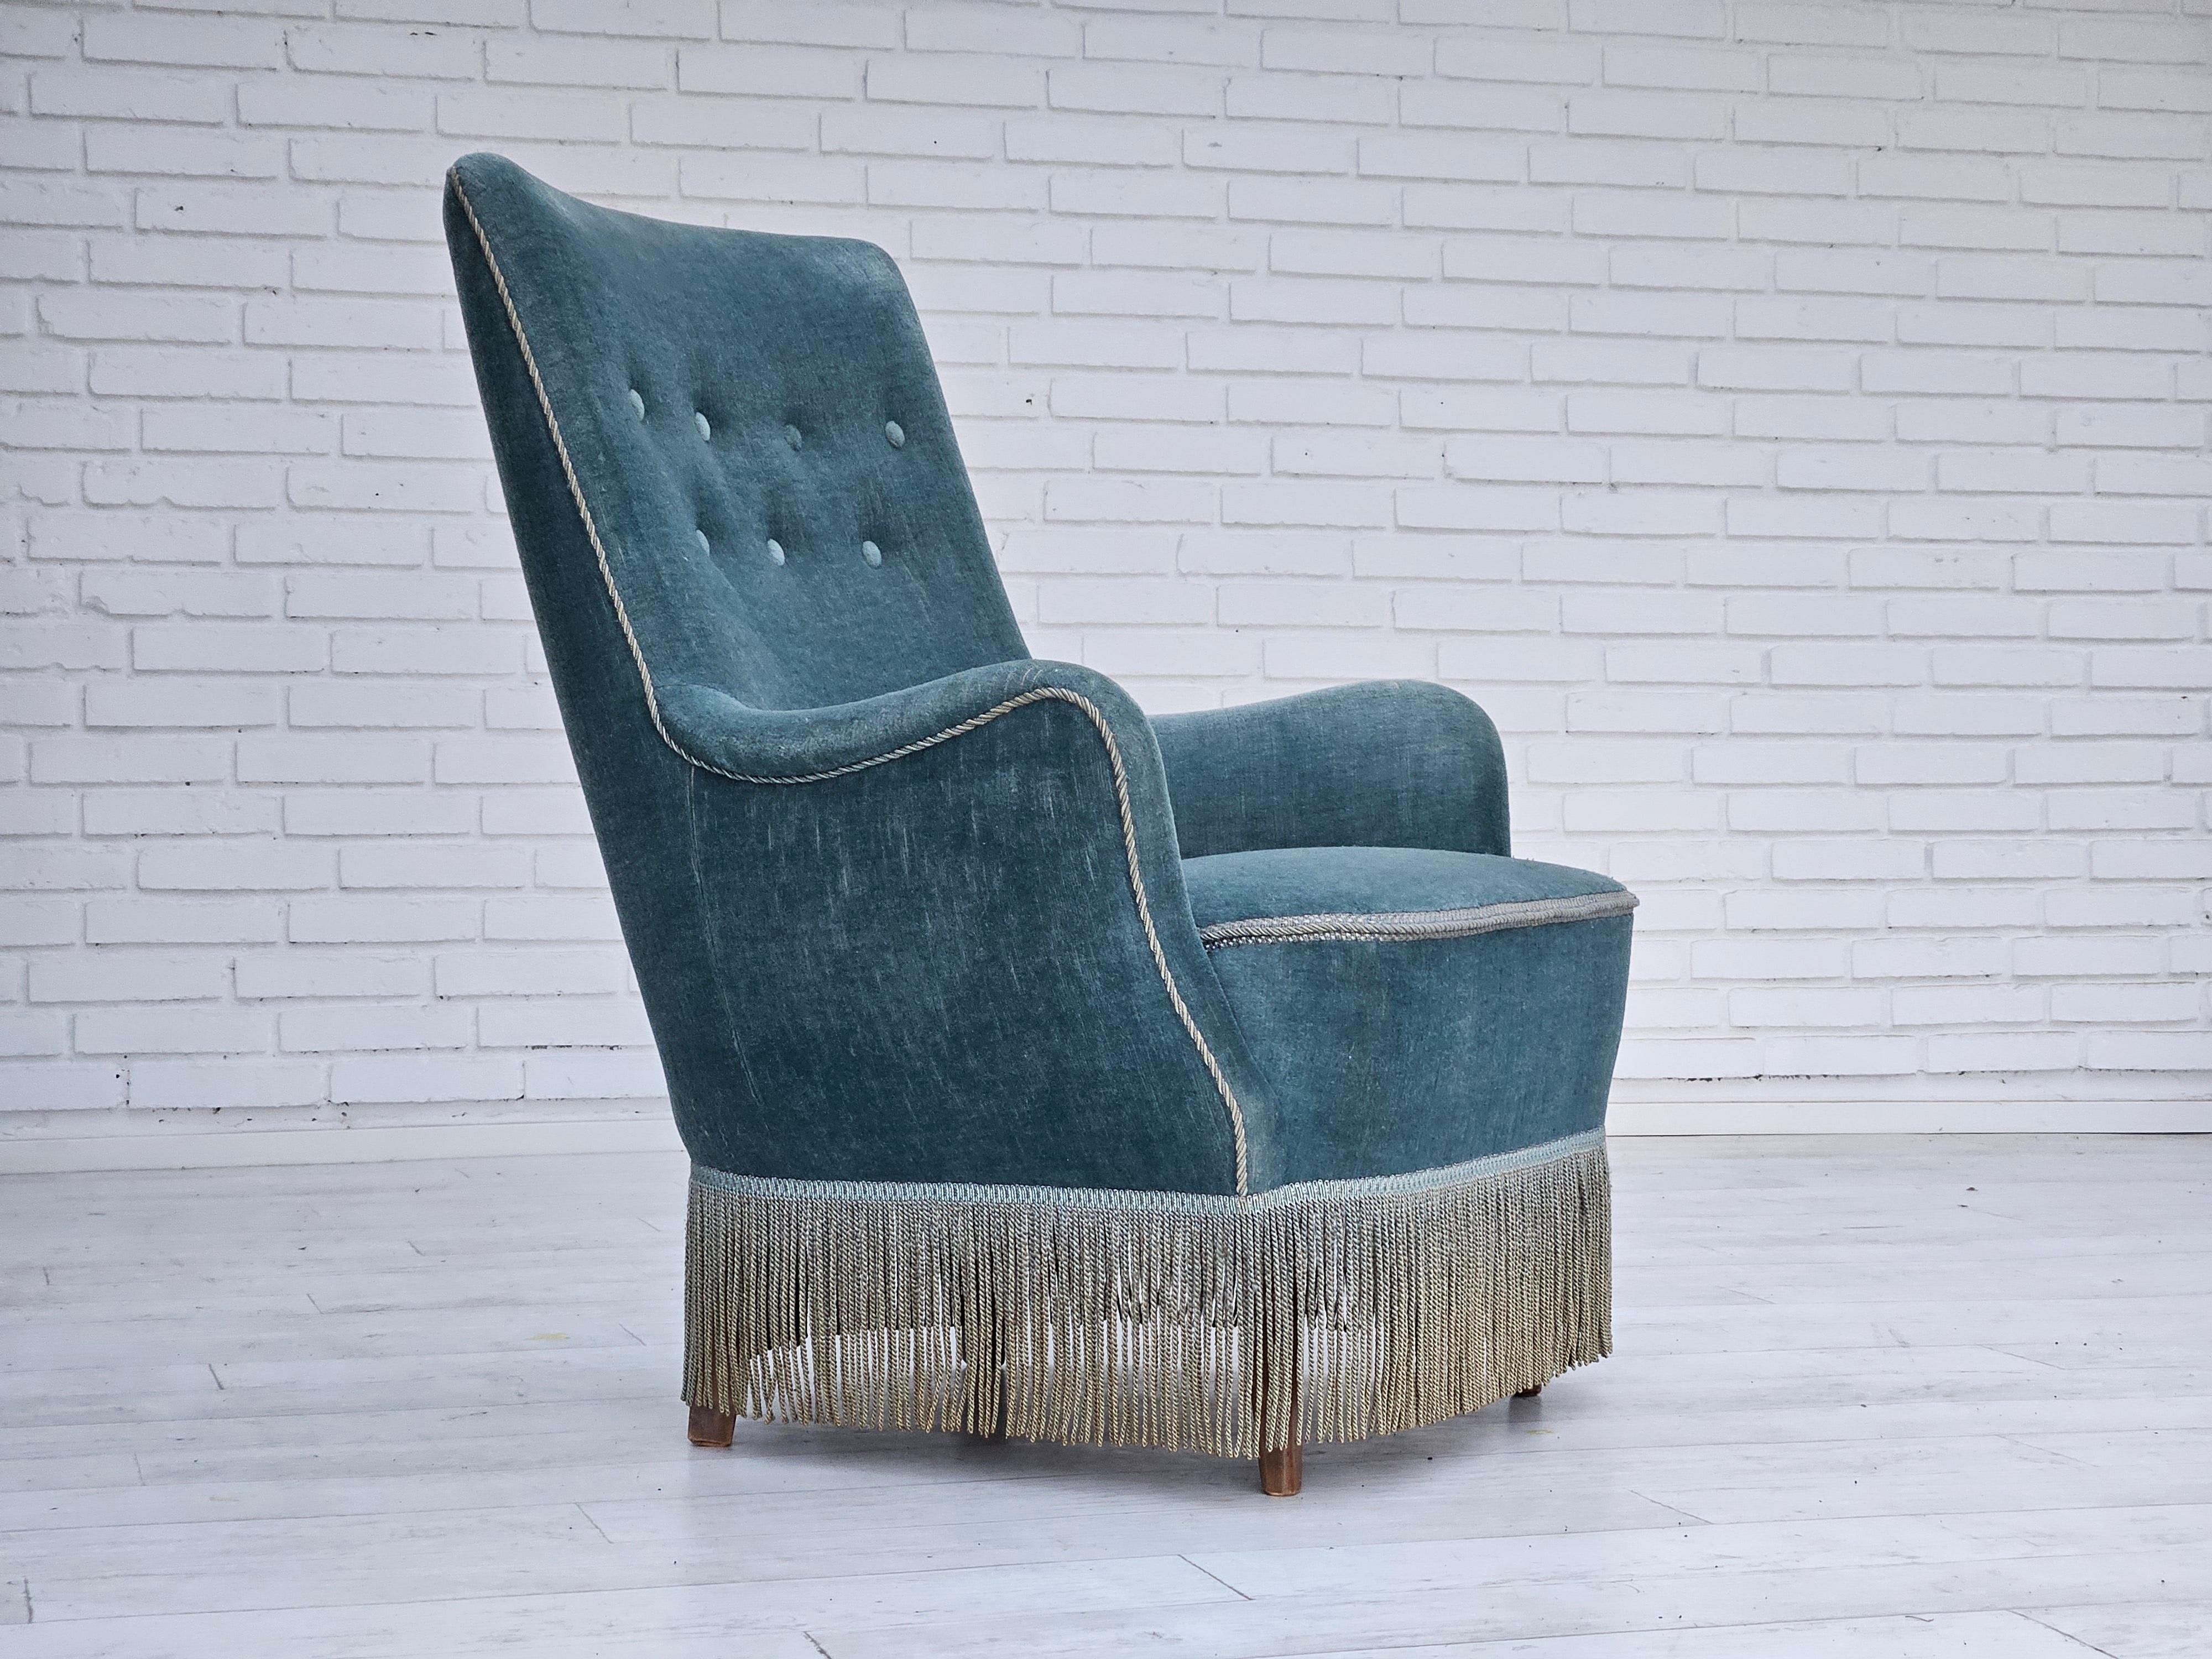  1960s, Danish armchair in original light blue velour. No smells and no stains. Beech wood legs, springs in the seat. Manufactured by Danish furniture manufacturer in about 1960s.